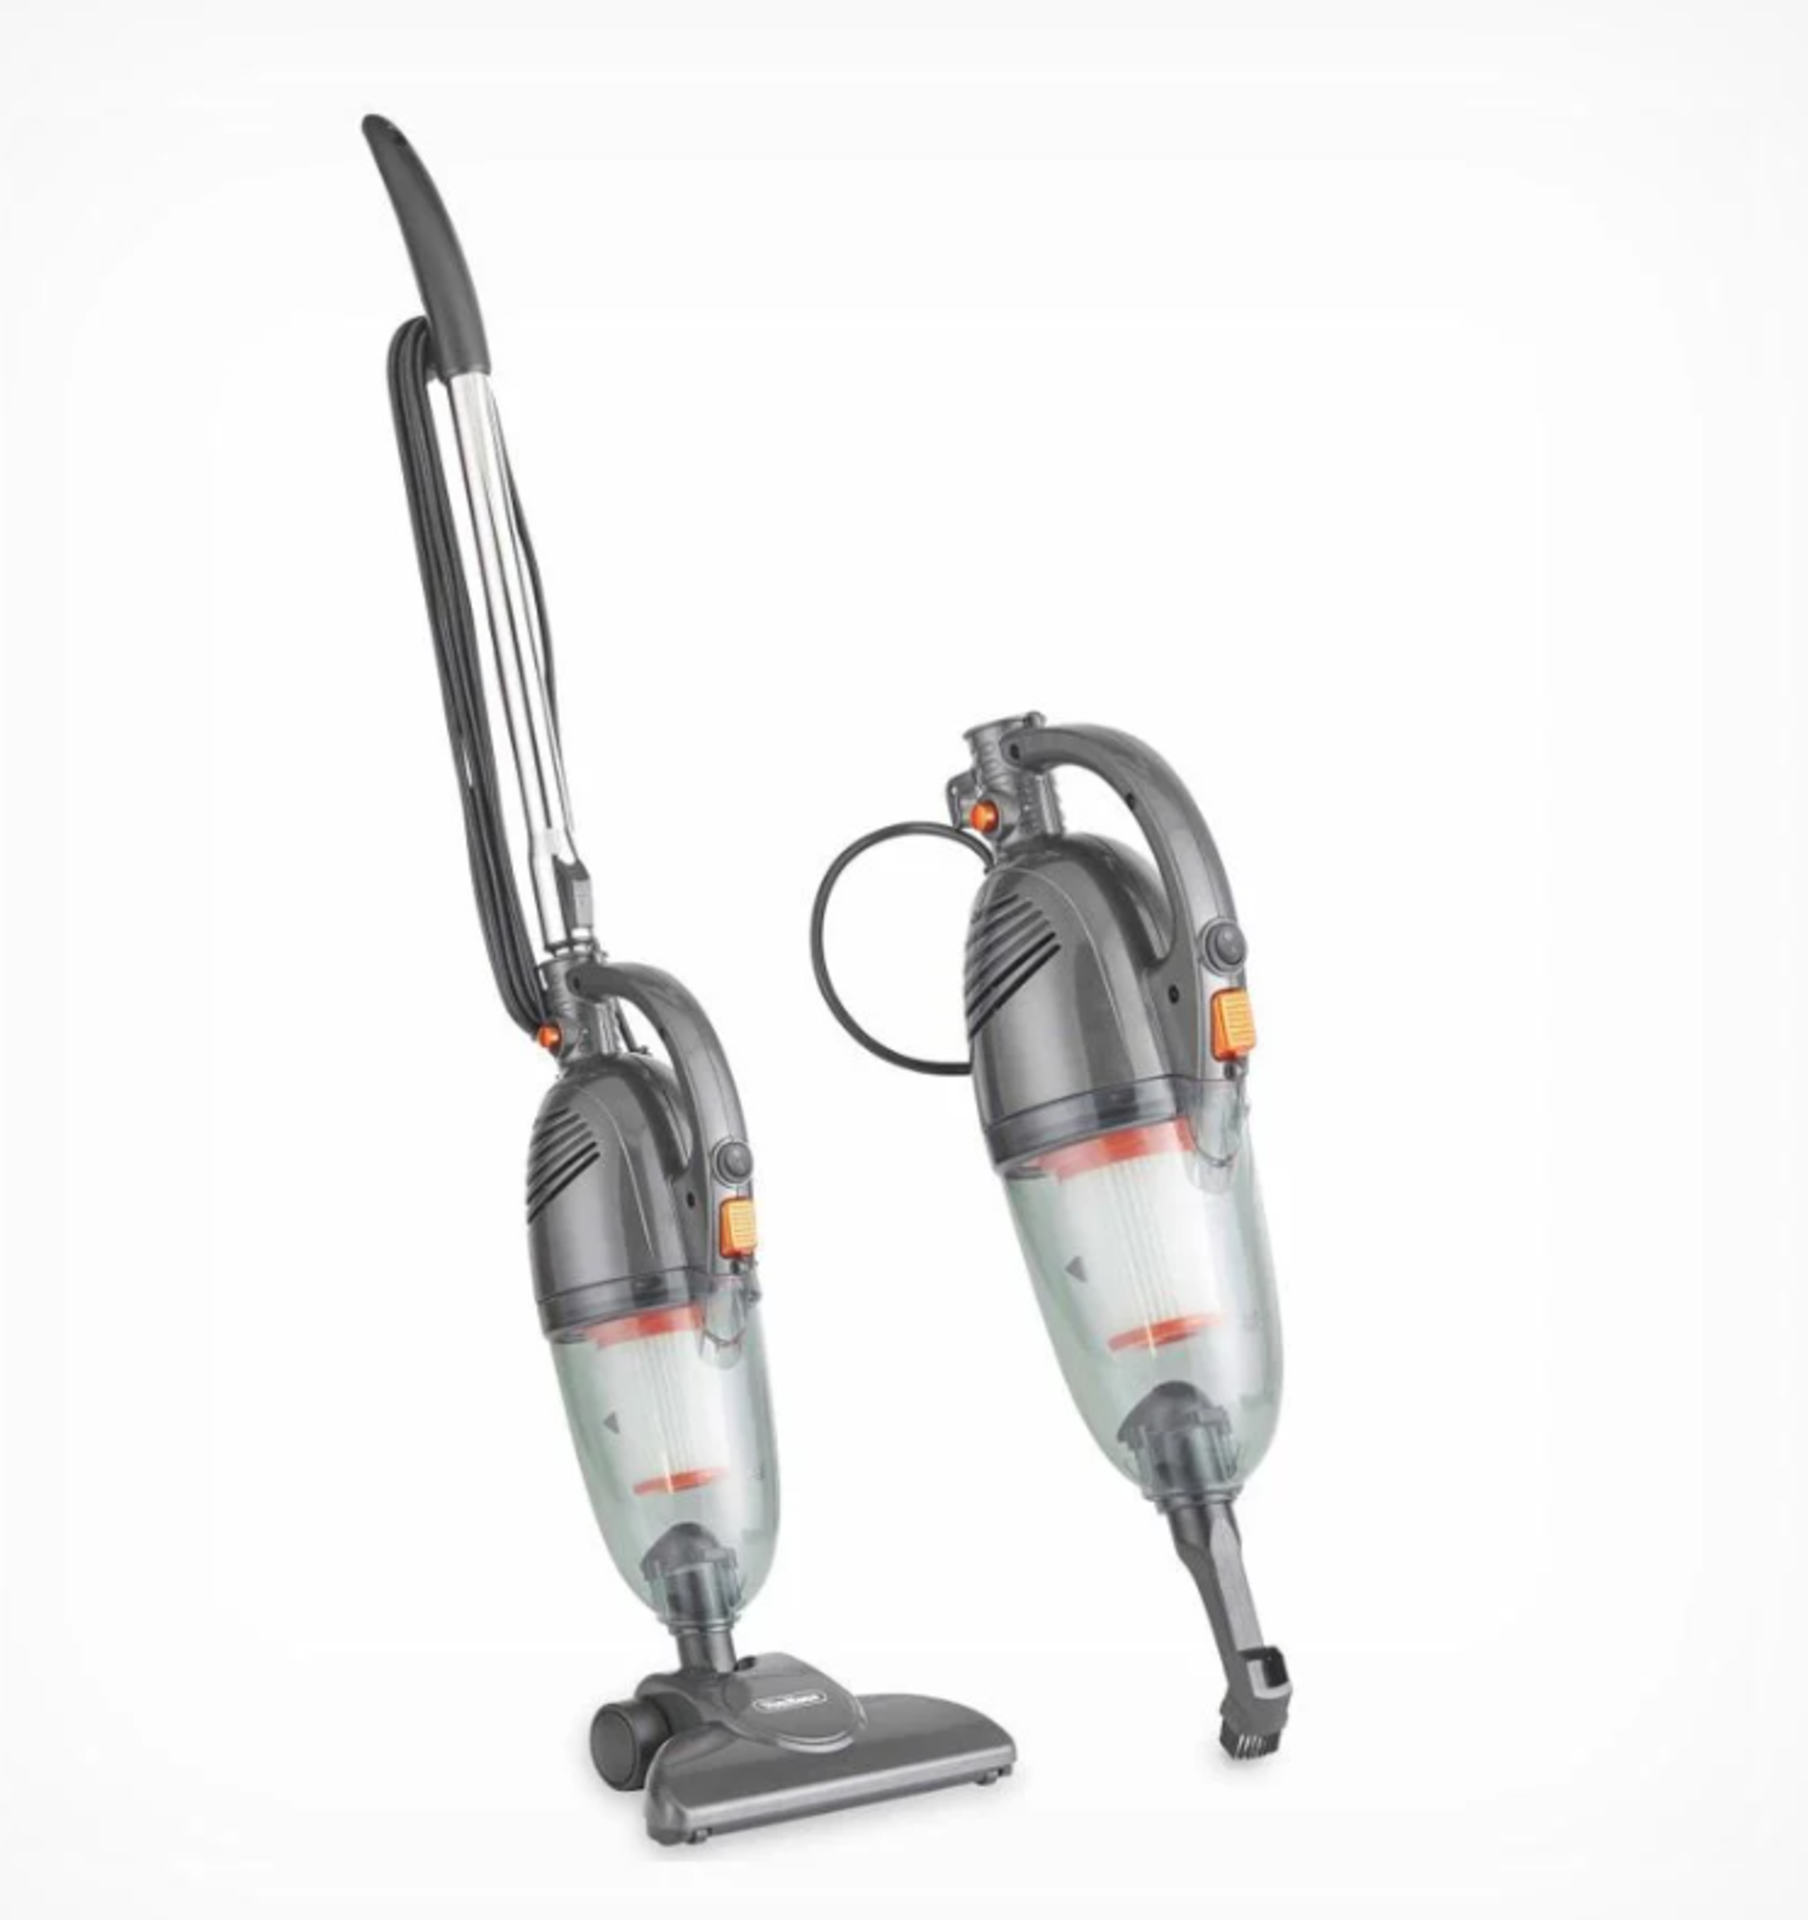 800W Grey 2 in 1 Stick Vacuum. Featuring a super lightweight construction and a low profile base